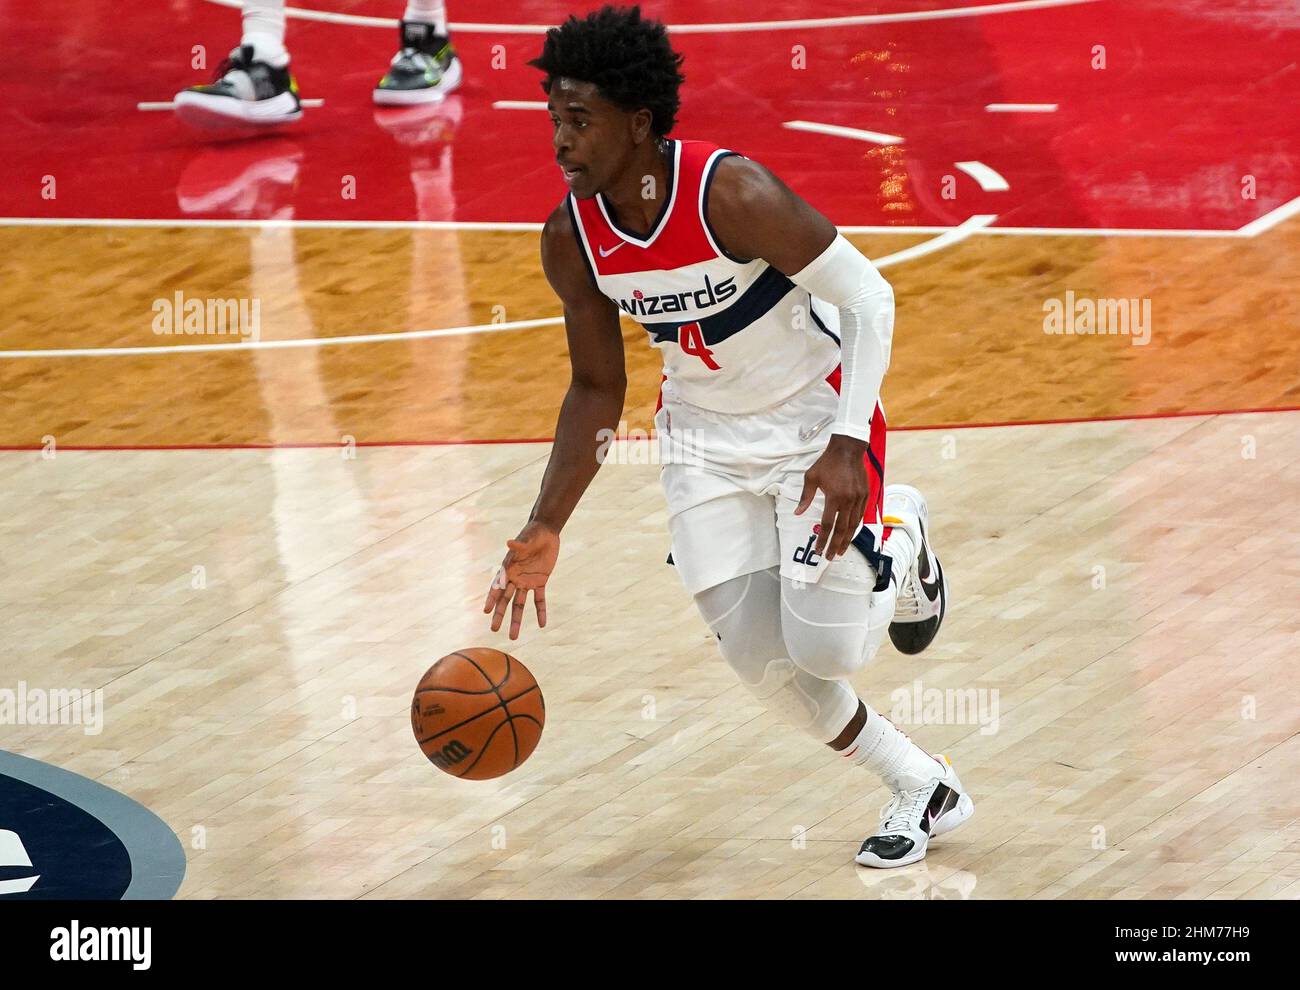 WASHINGTON, DC - FEBRUARY 07: Washington Wizards guard Aaron Holiday (4) on  the attack during a NBA game between the Washington Wizards and the Miami  Heat, on February 07, 2022, at Capital